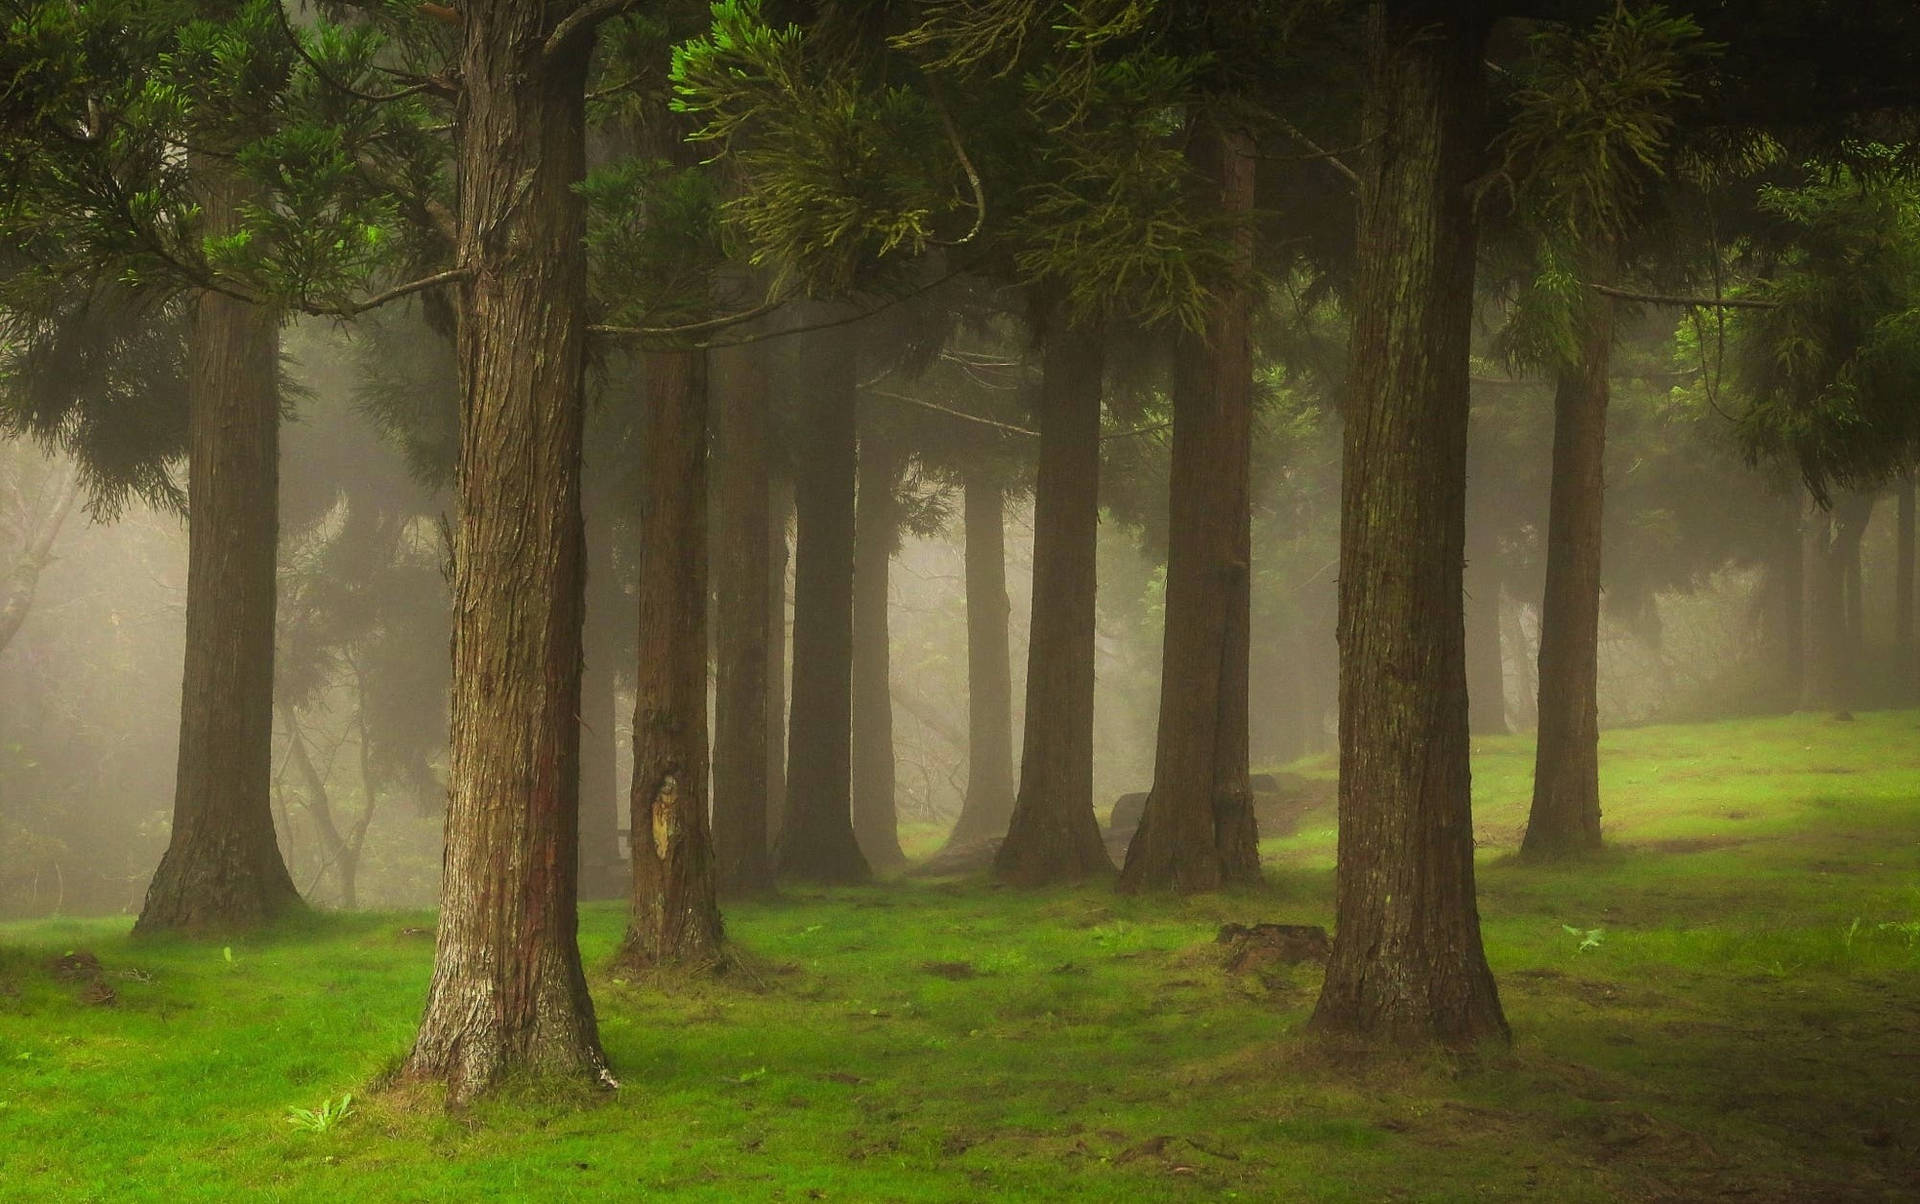 Foggy Forest With Grassy Ground